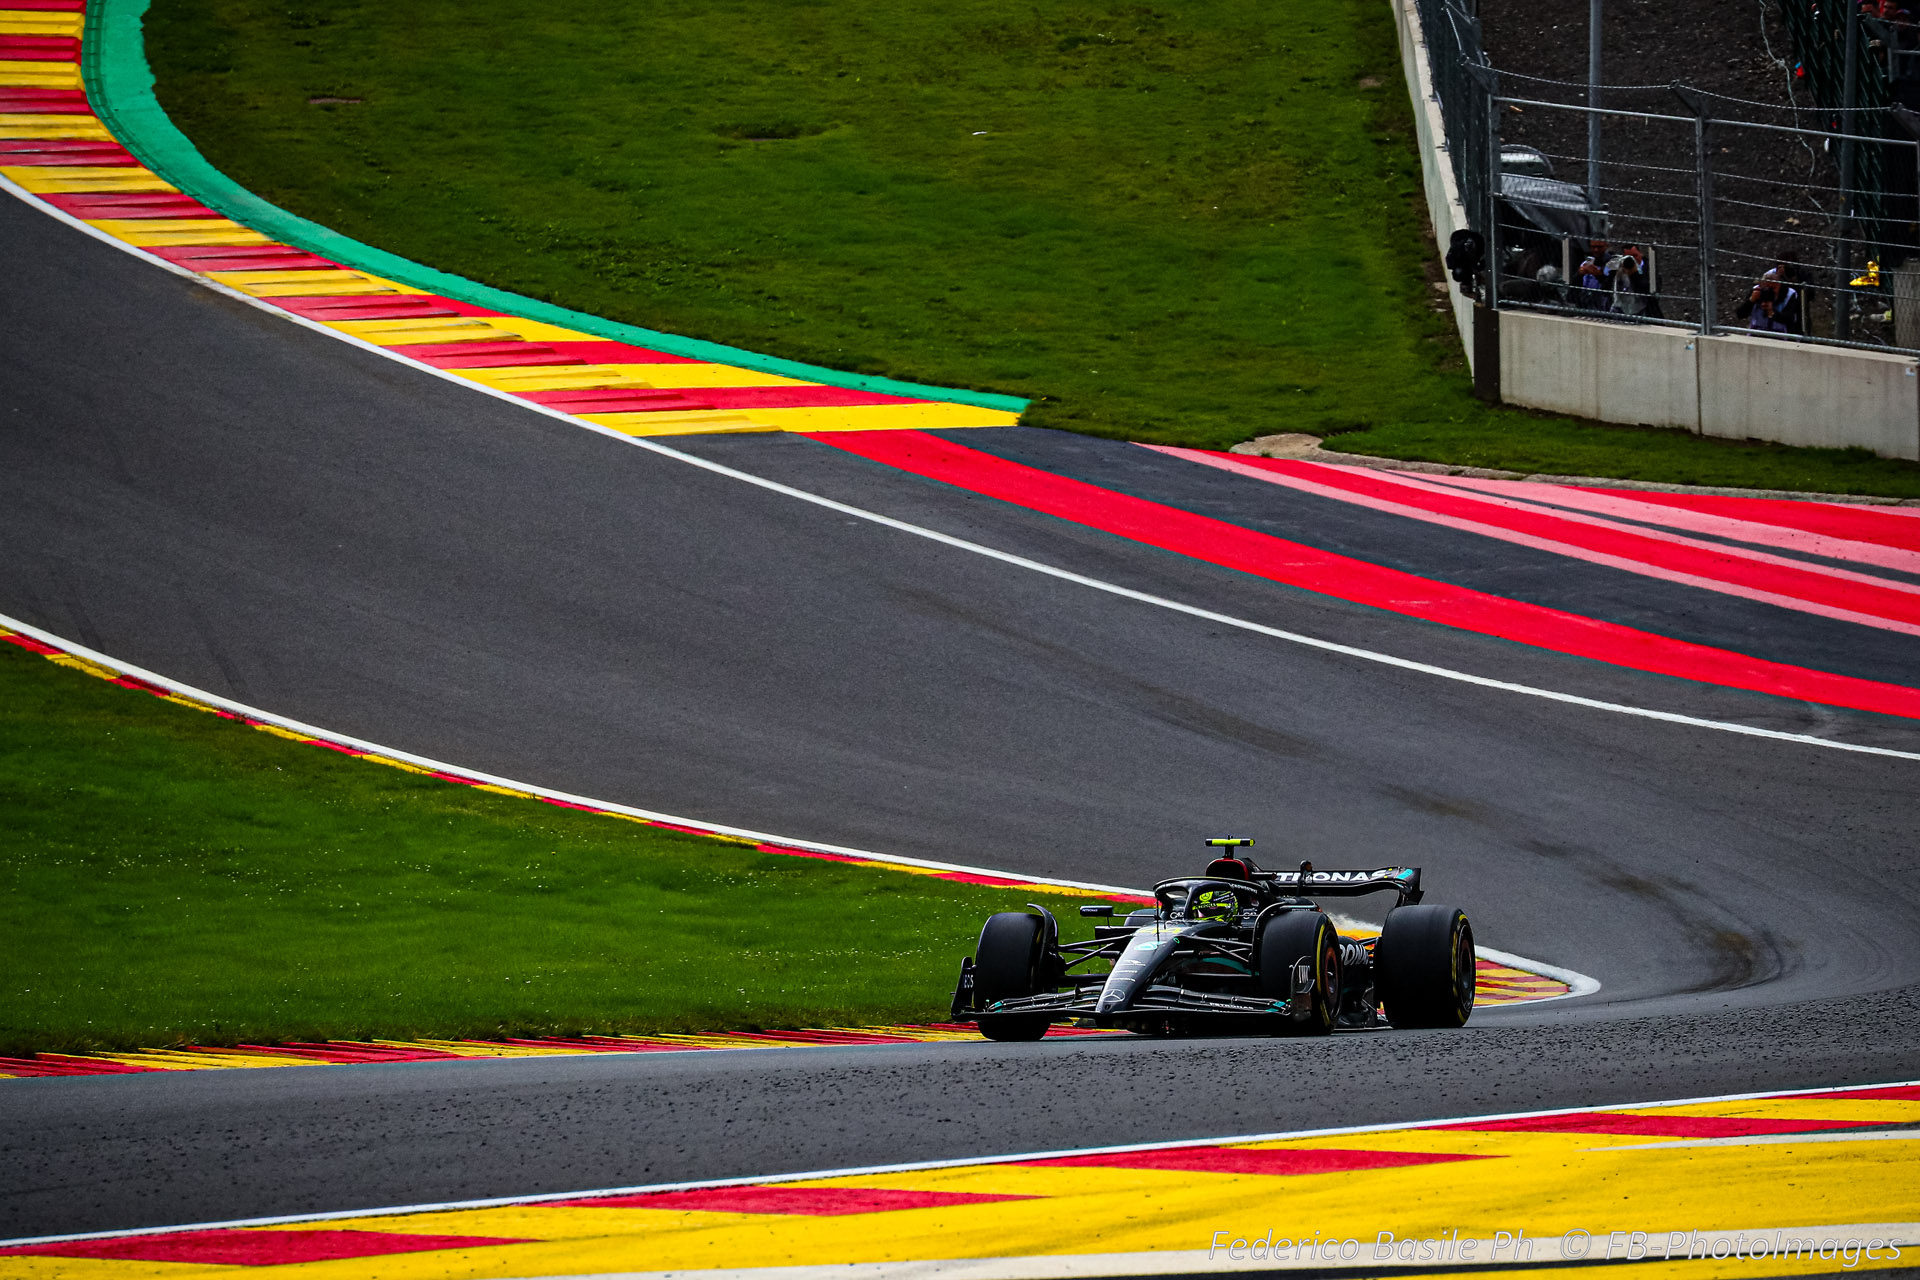 #44 Lewis Hamilton, (GRB) AMG Mercedes Ineos during the Belgian GP, Spa-Francorchamps 27-30 July 2023 Formula 1 World championship 2023.